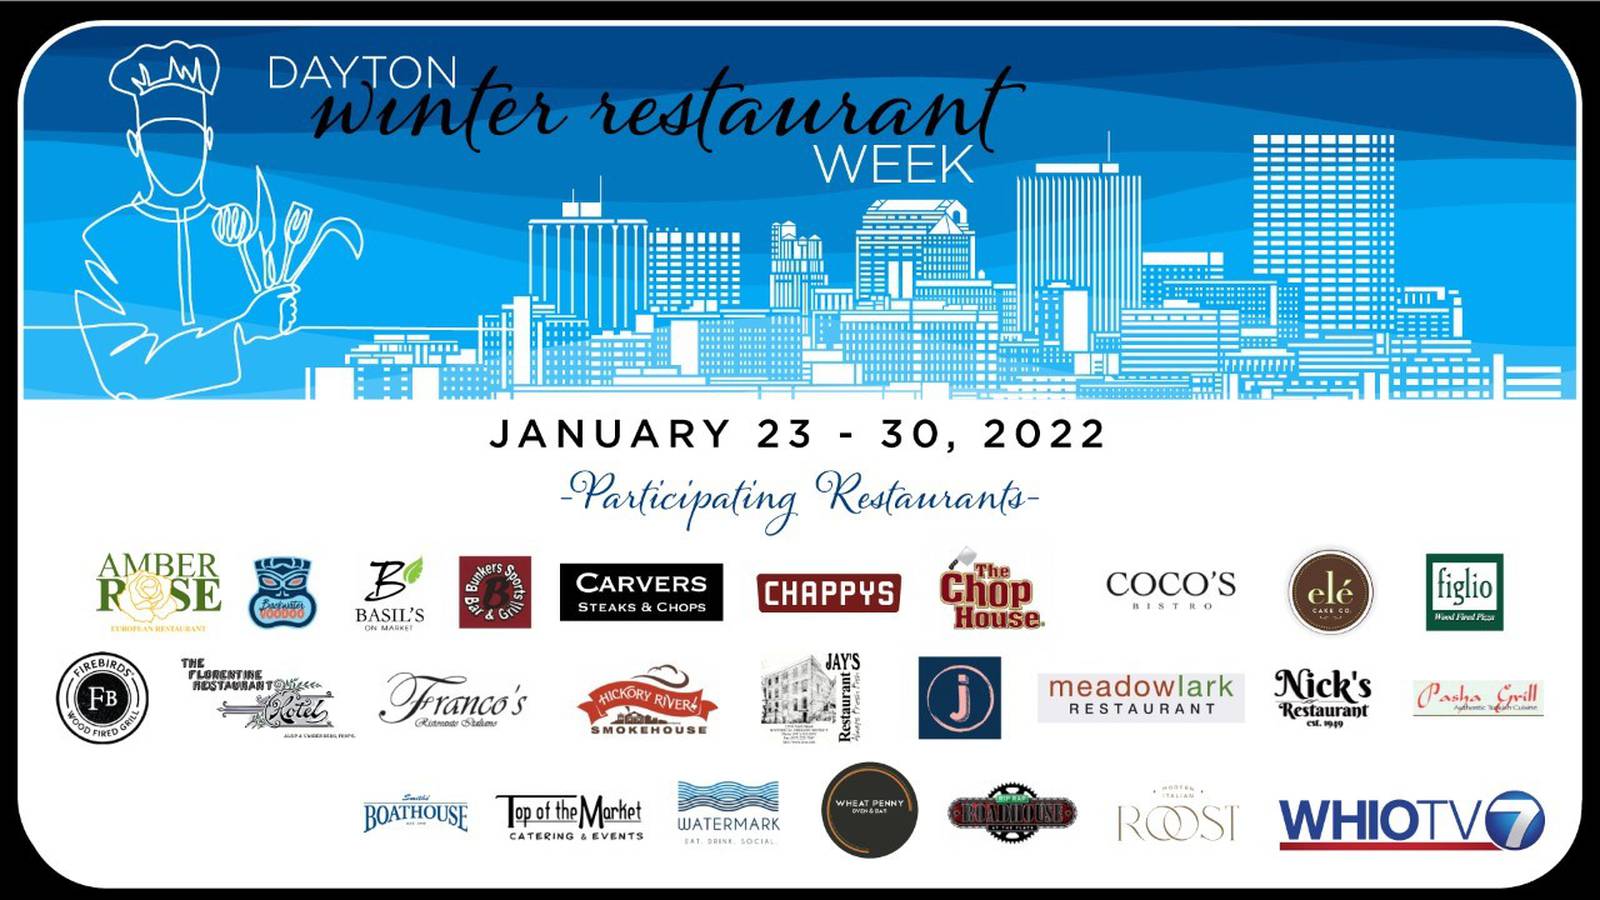 Miami Valley Winter Restaurant Week Here’s where food lovers can eat